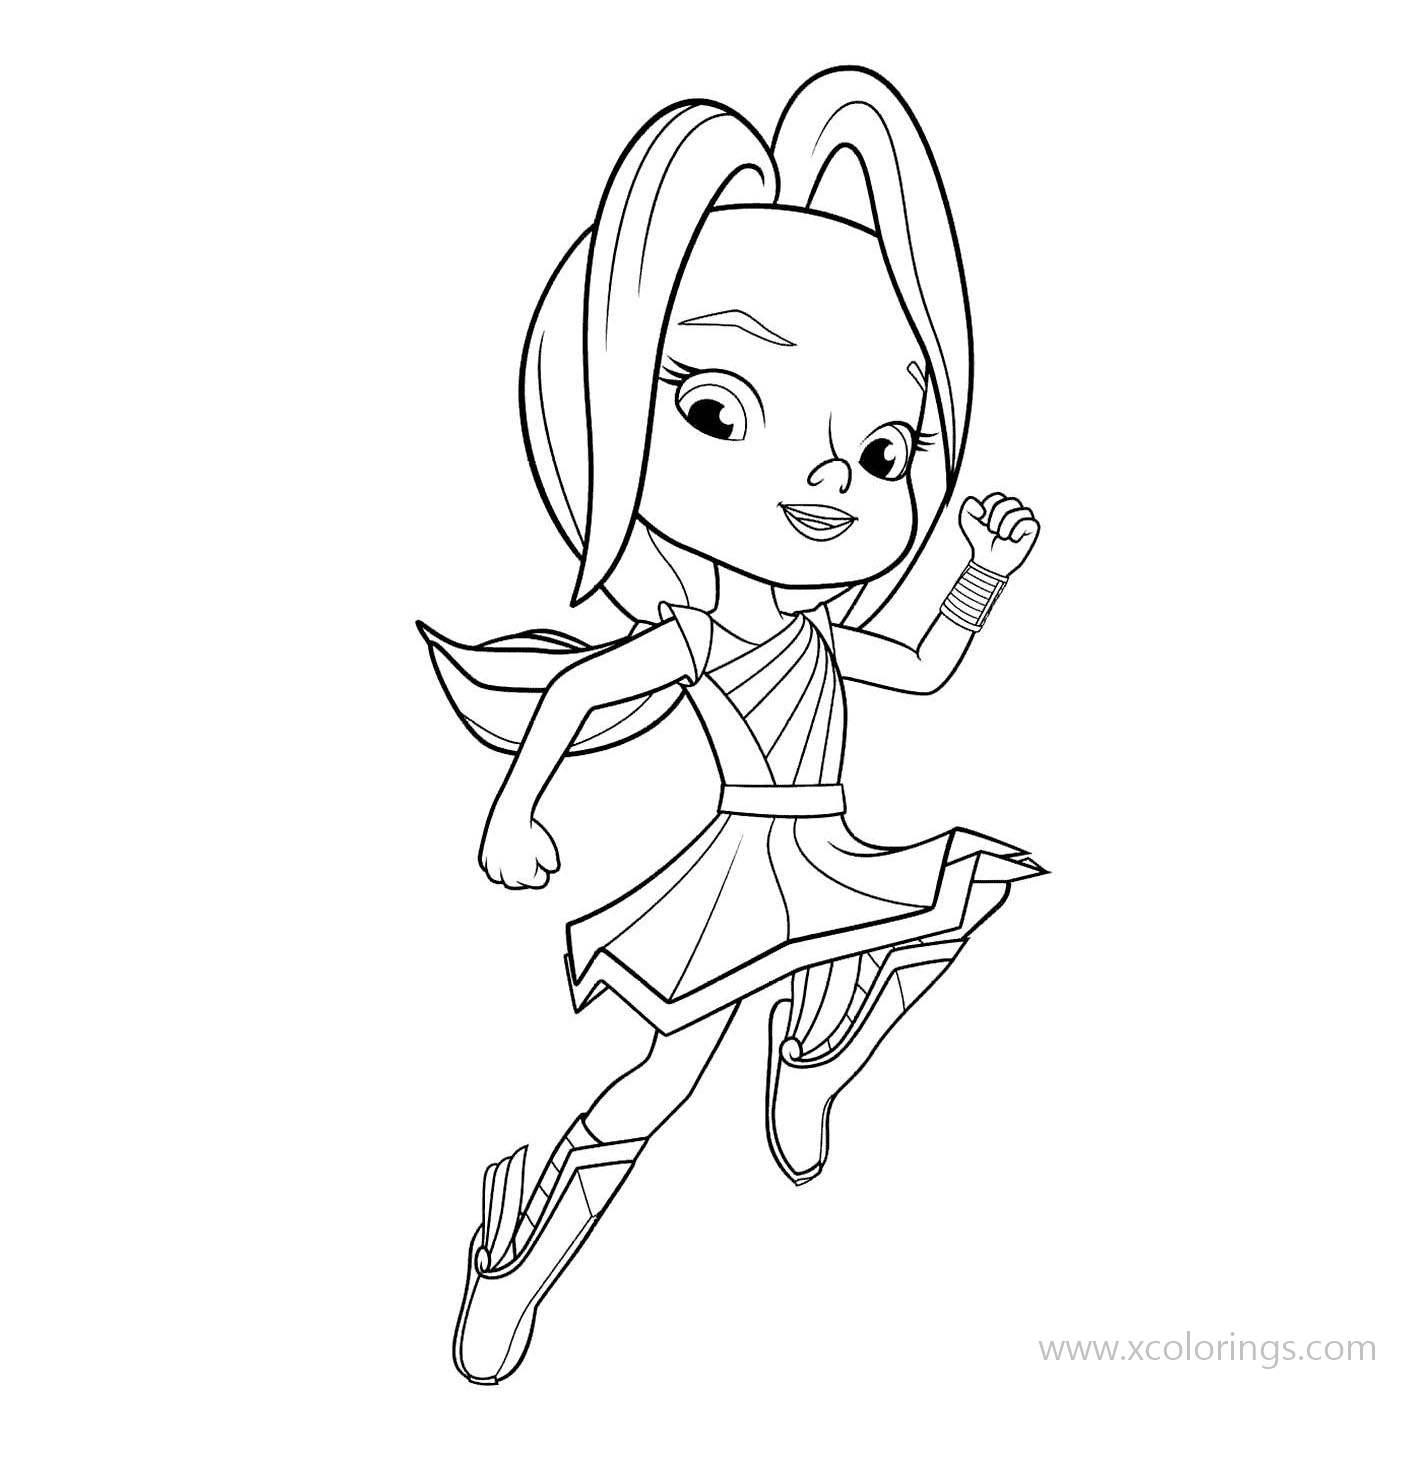 Rainbow Rangers Indy Coloring Pages - XColorings.com